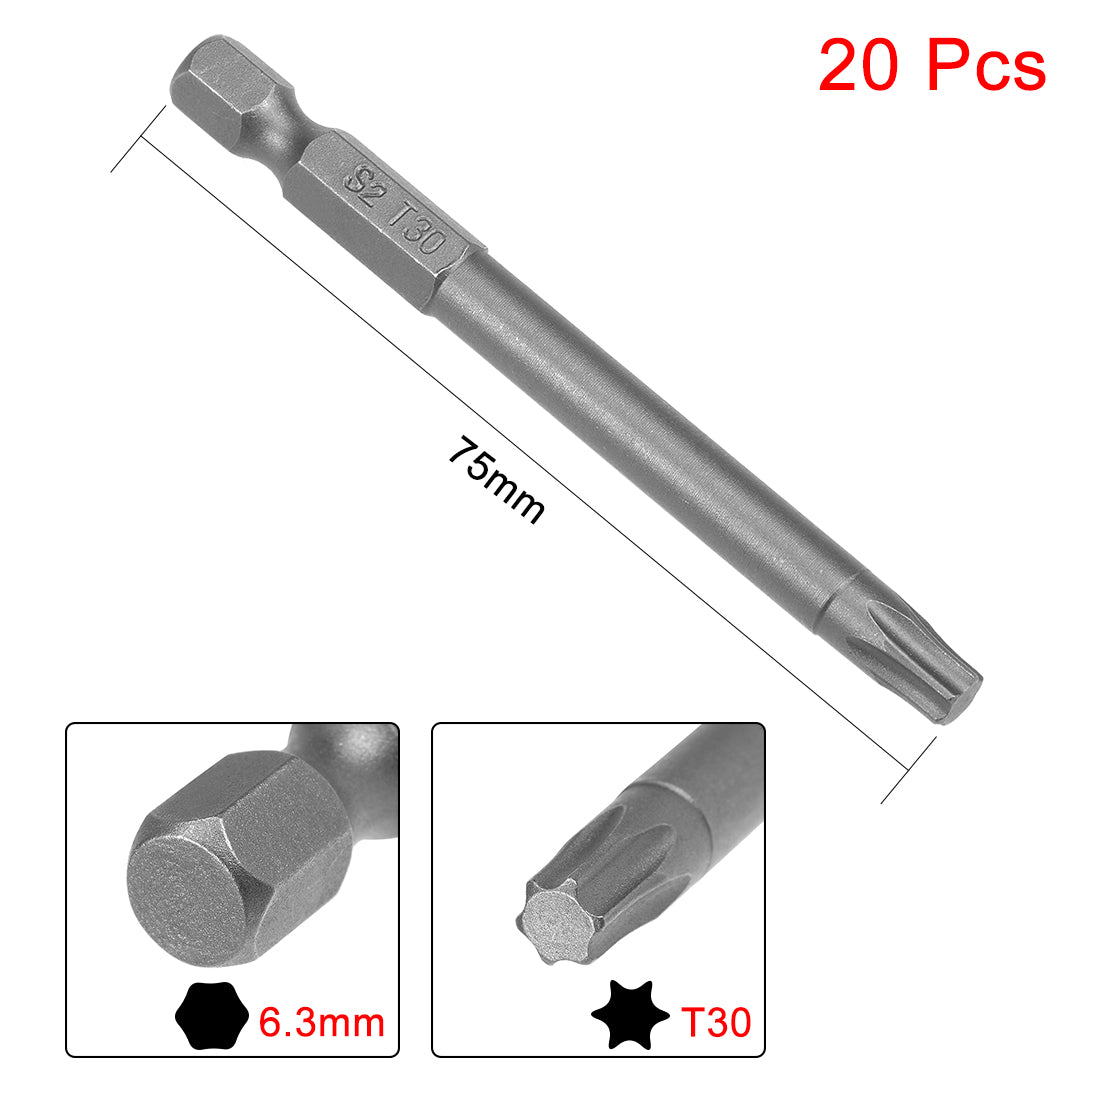 Uxcell Uxcell 20pcs 75mm Long 1/4" Hex Shank T10 Magnetic Torx Head Screwdriver Bits S2 High Alloy Steel